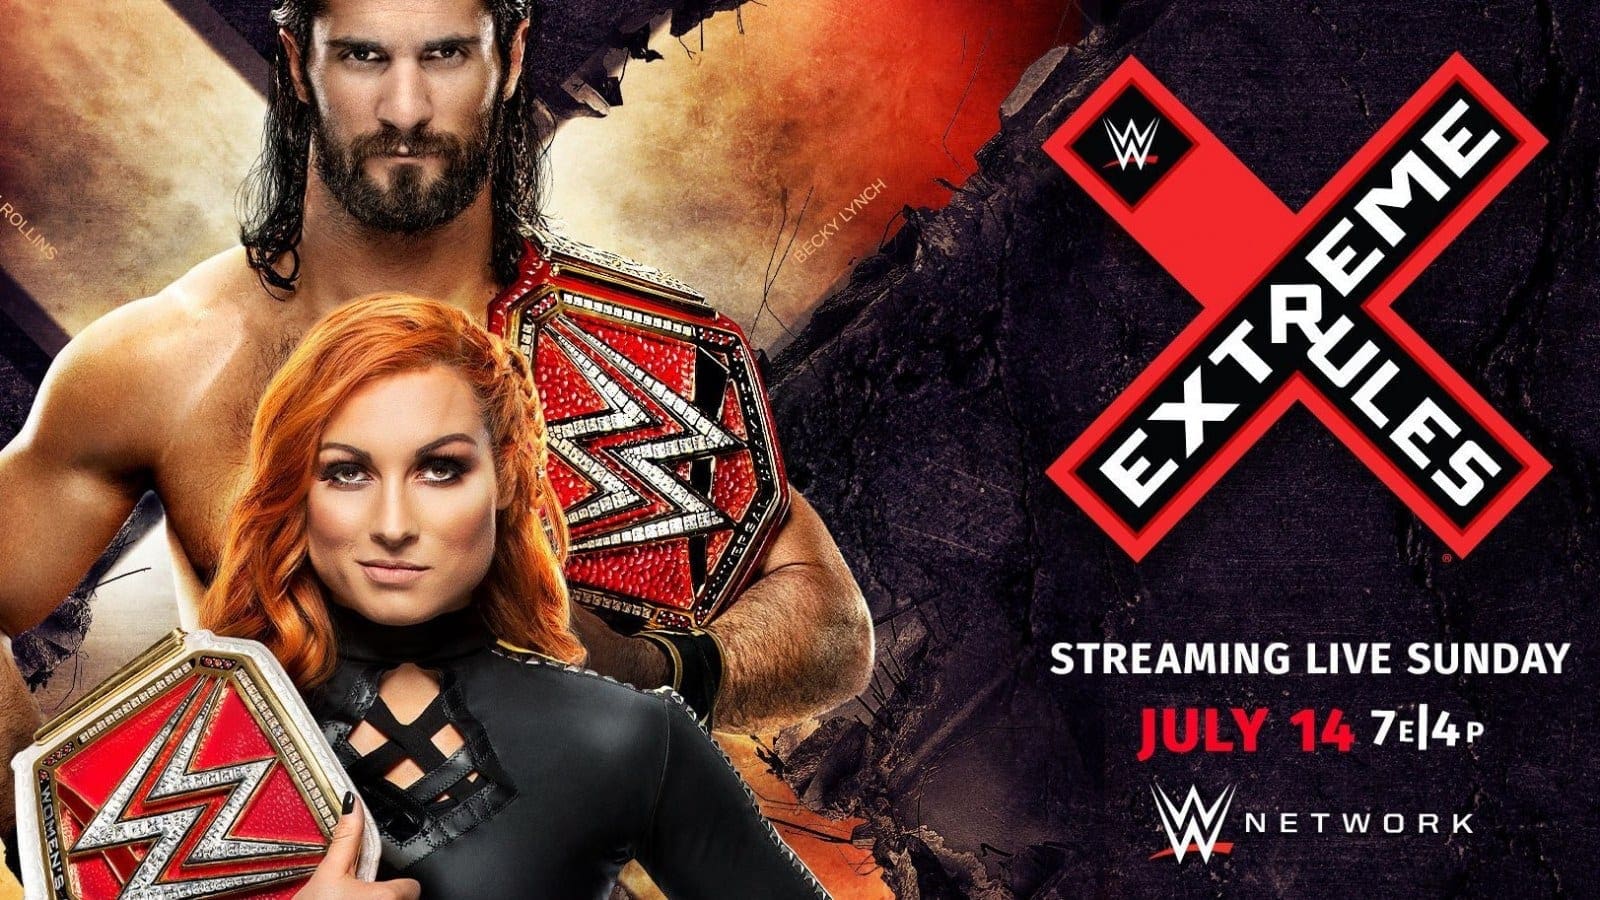 WWE Extreme Rules Results for July 14, 2019